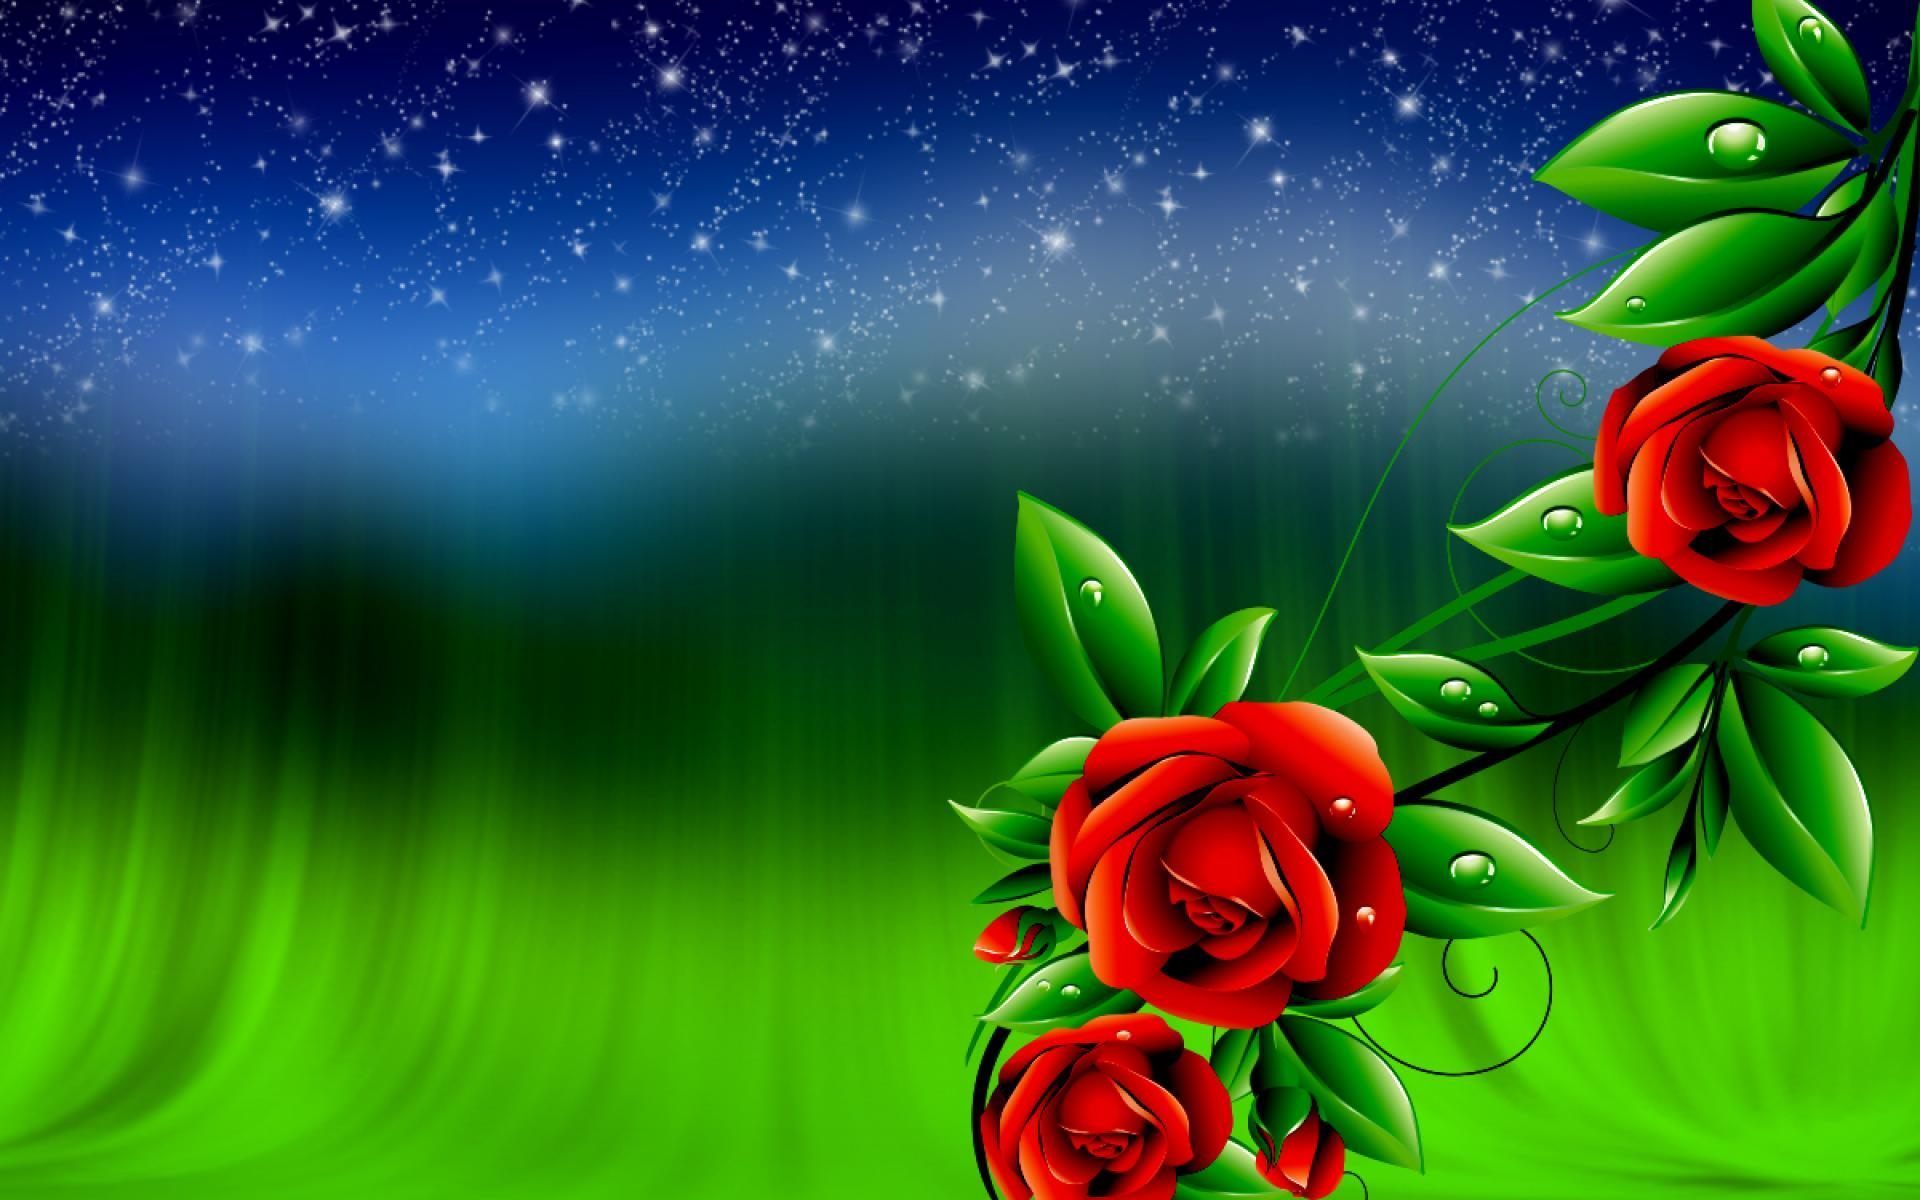 Roses Background HD Wallpaper Download Of Red Roses